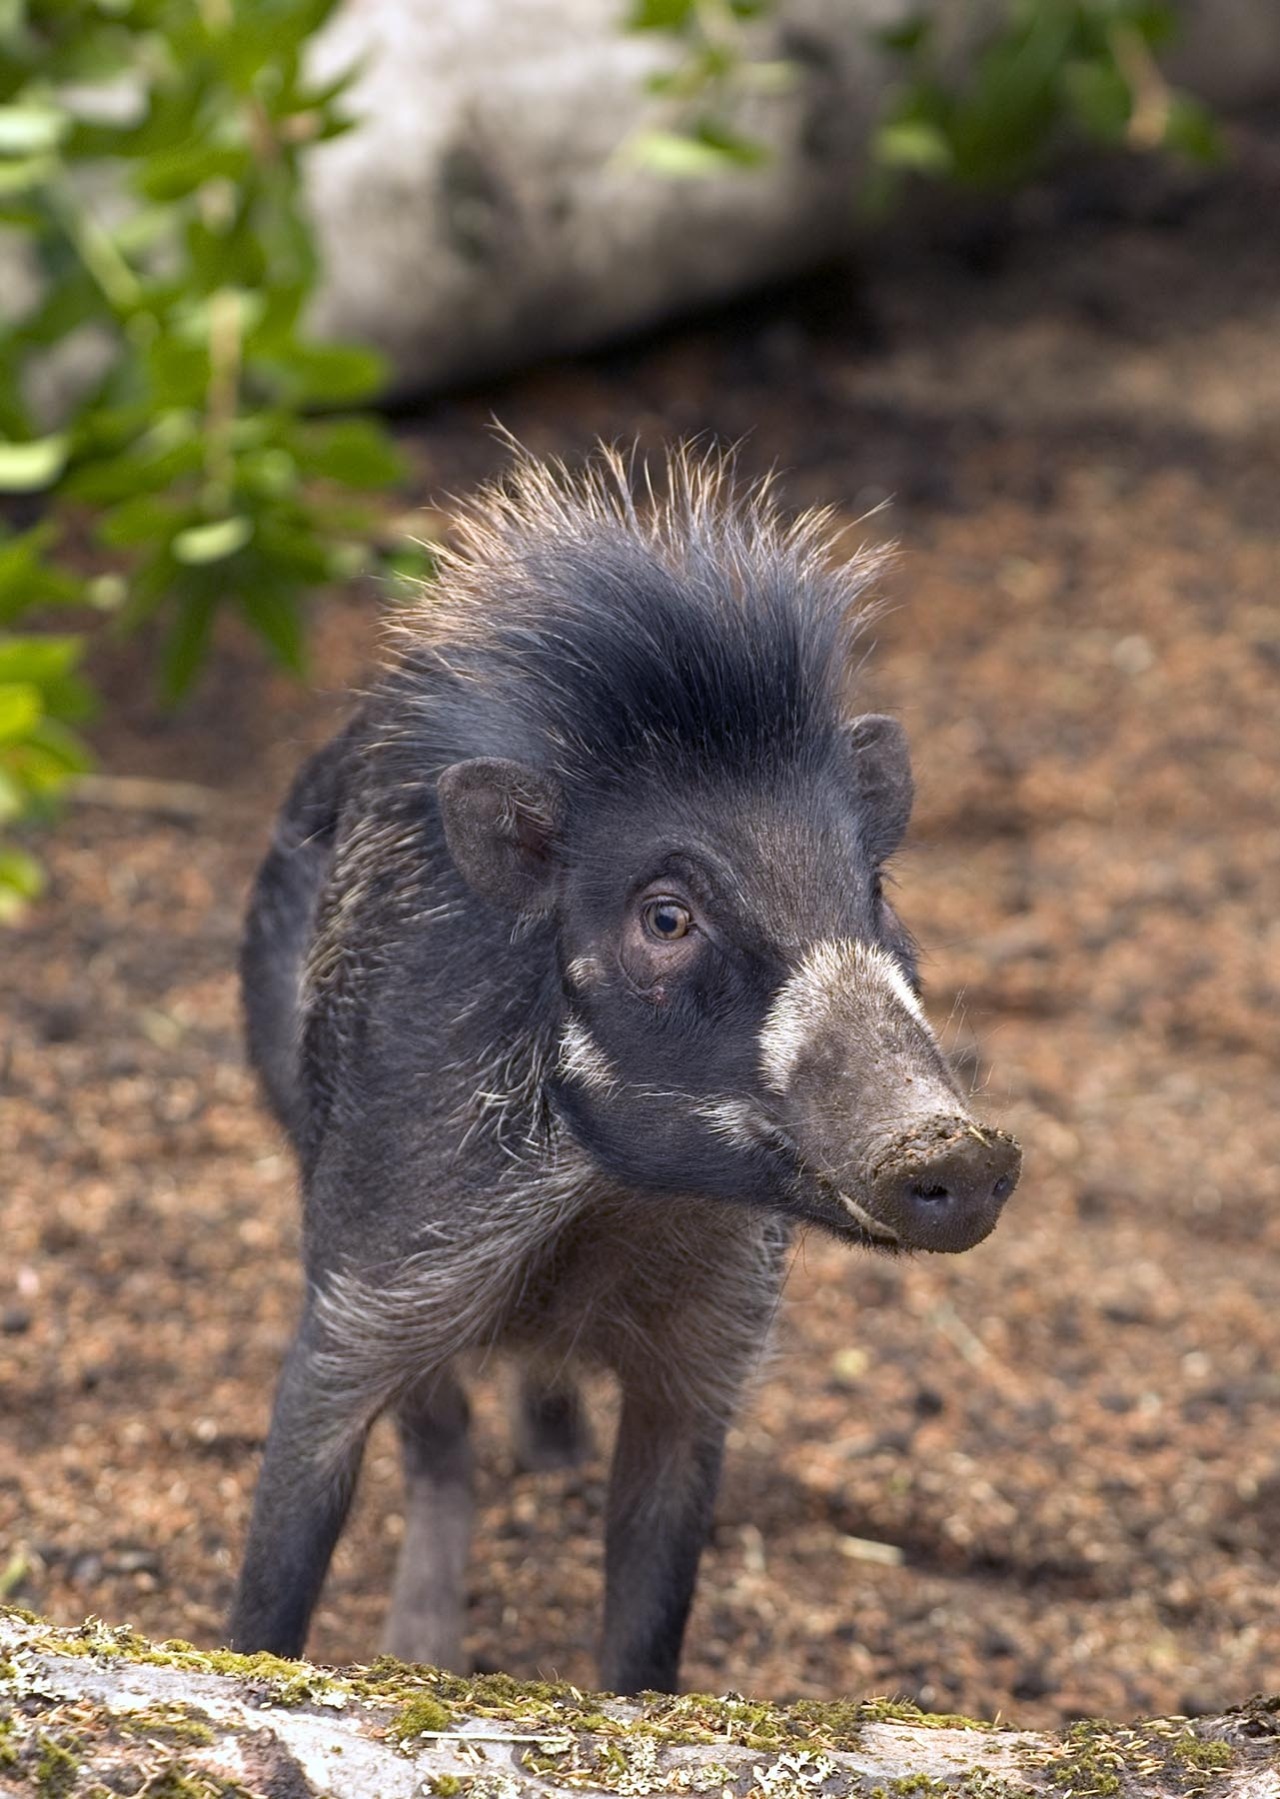 animaltoday:  Vasayan Warty Pig (Sus cebifrons)  These are small forest dwelling